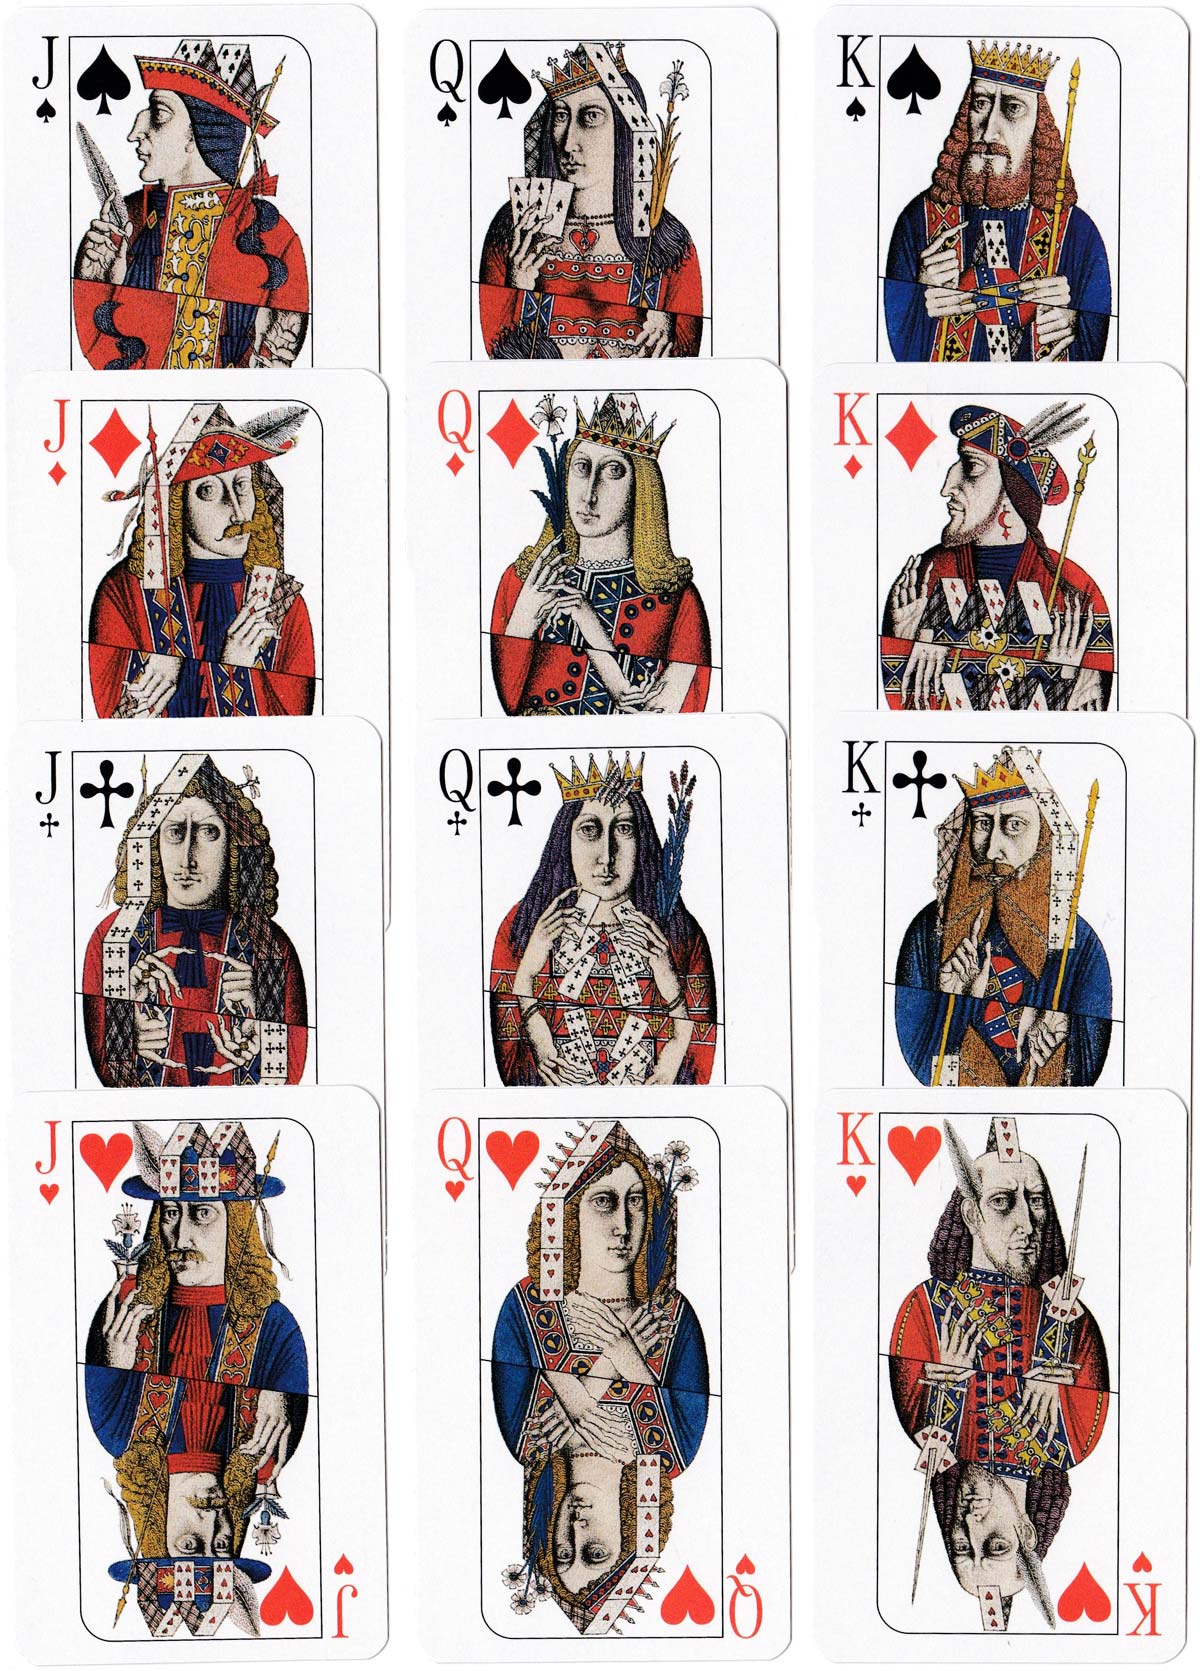 “Cosmopolitan” № 2121 playing cards designed by Russian artist Valeri Mishin, 1996